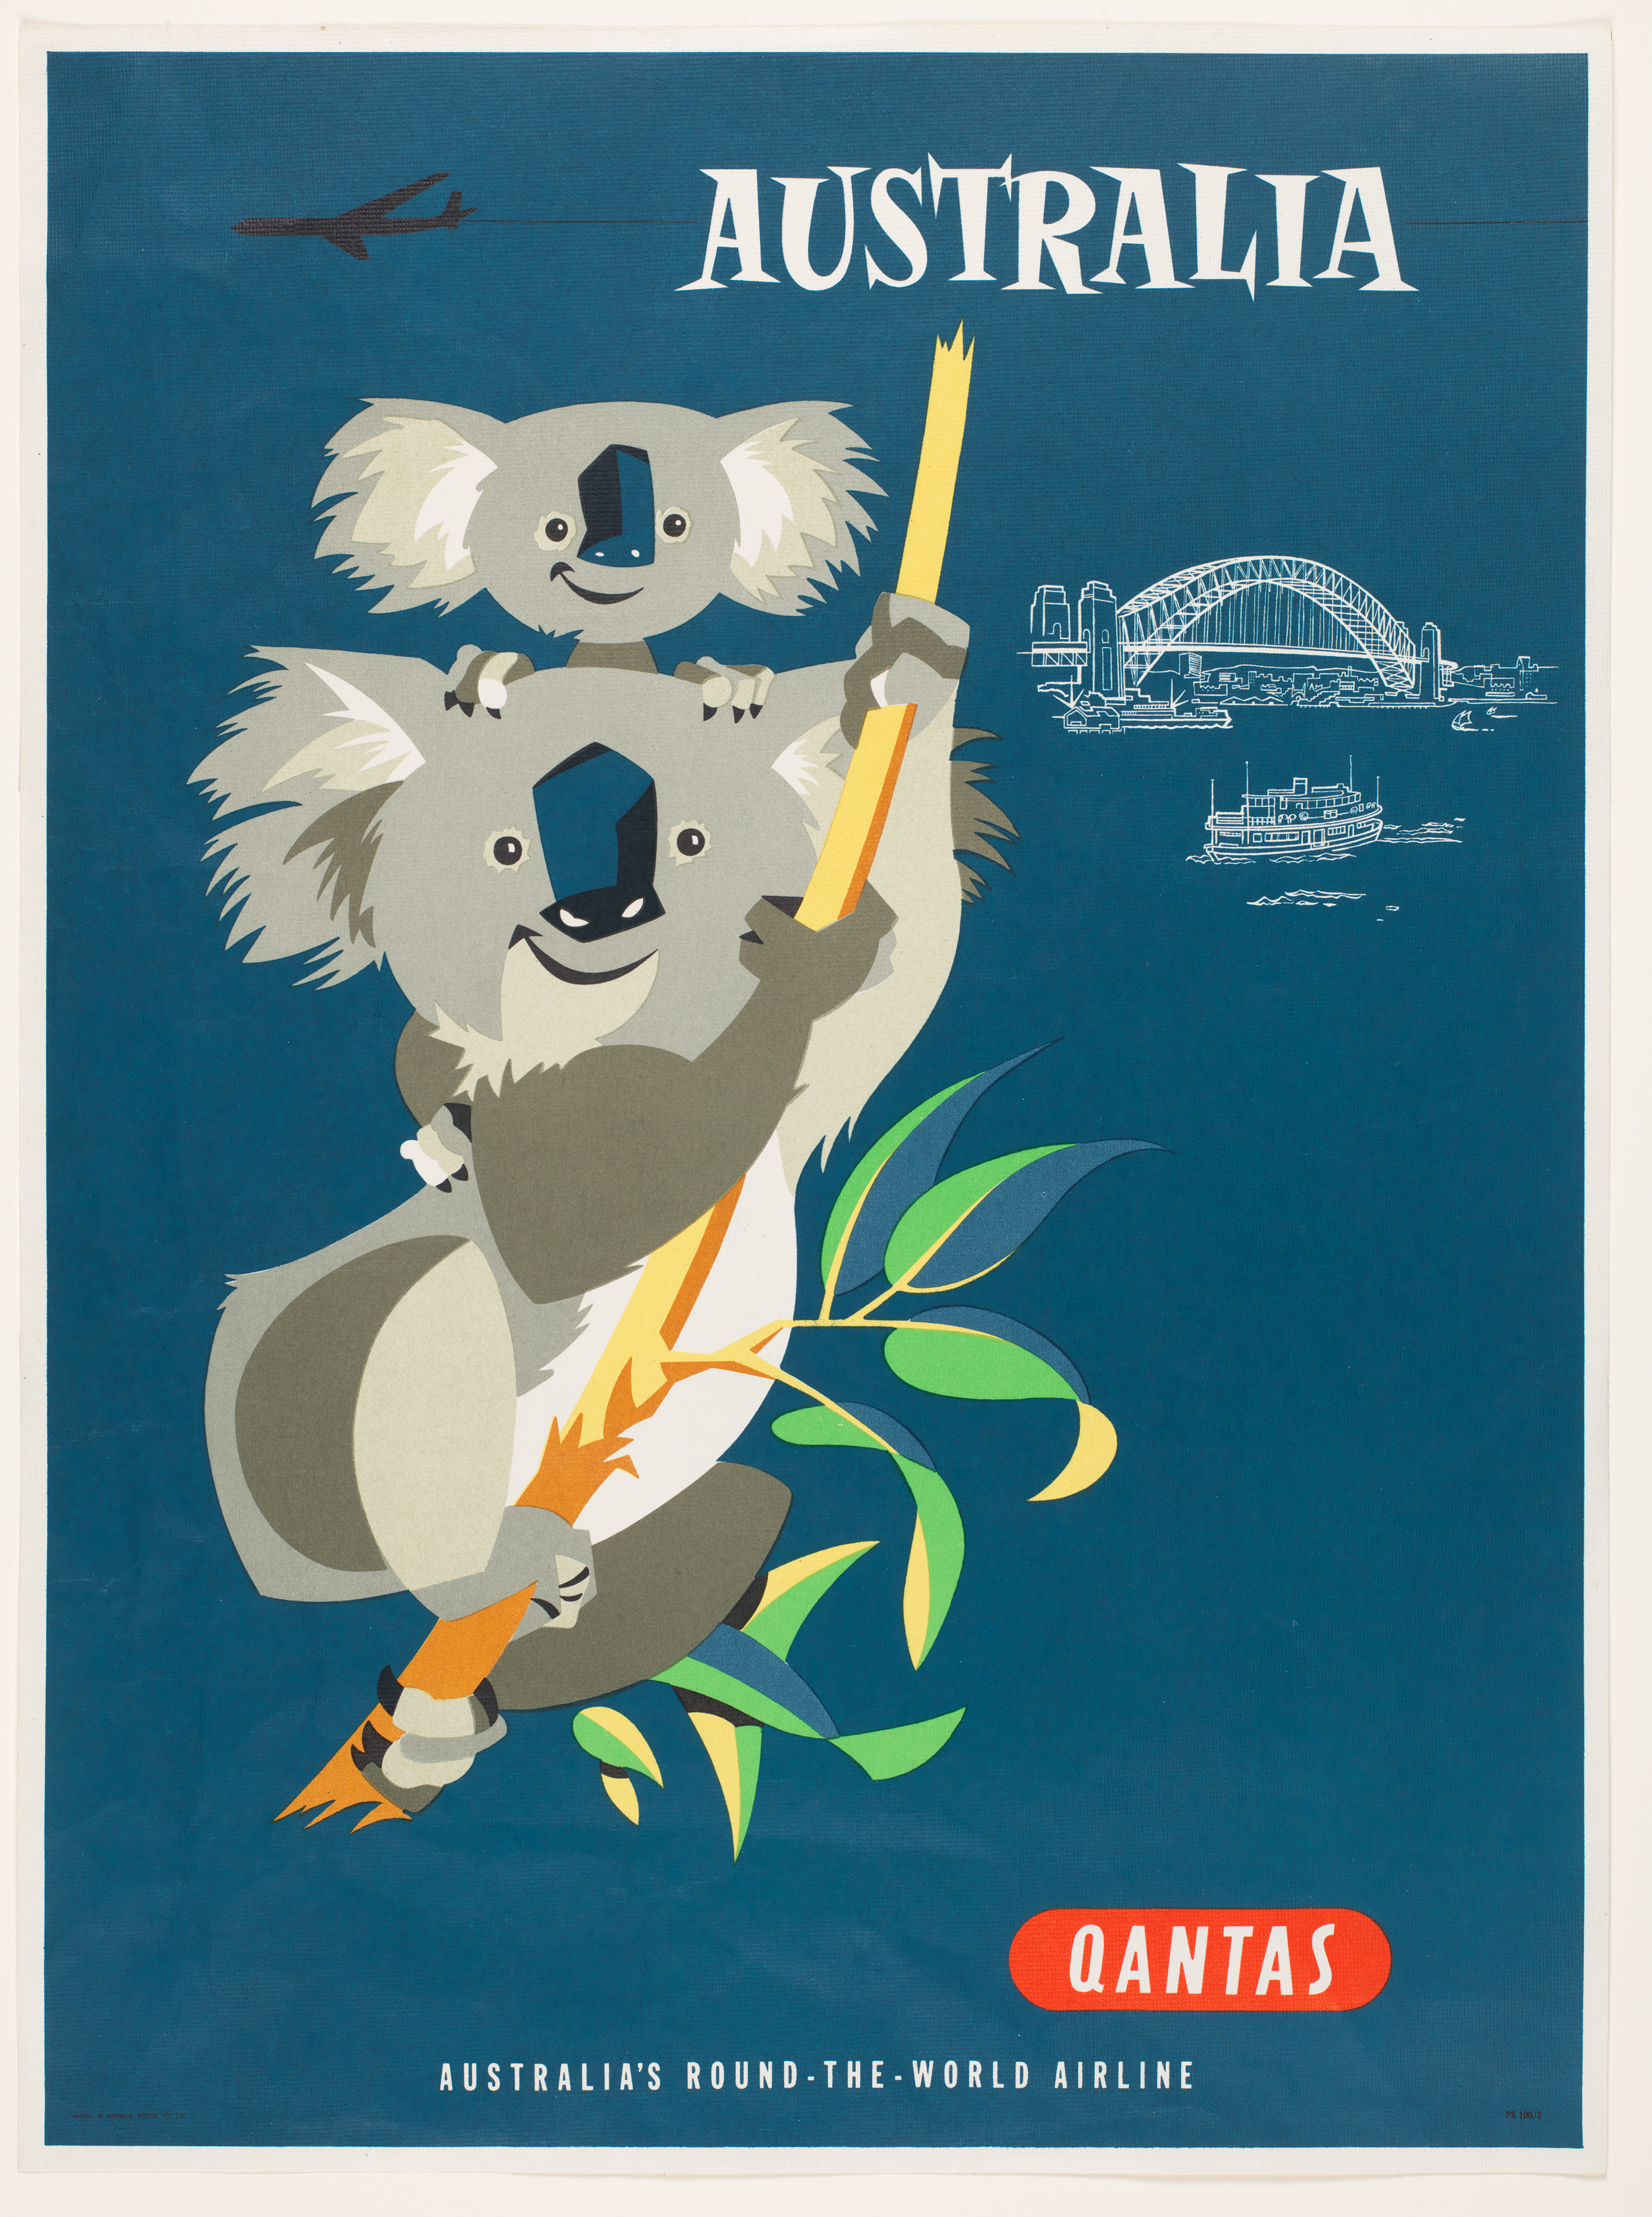 Promotional poster for Qantas Airlines. Two illustrated koala grasp a gum branch in the foreground. A small illustration of the Harbour Bridge is in the background of the image.